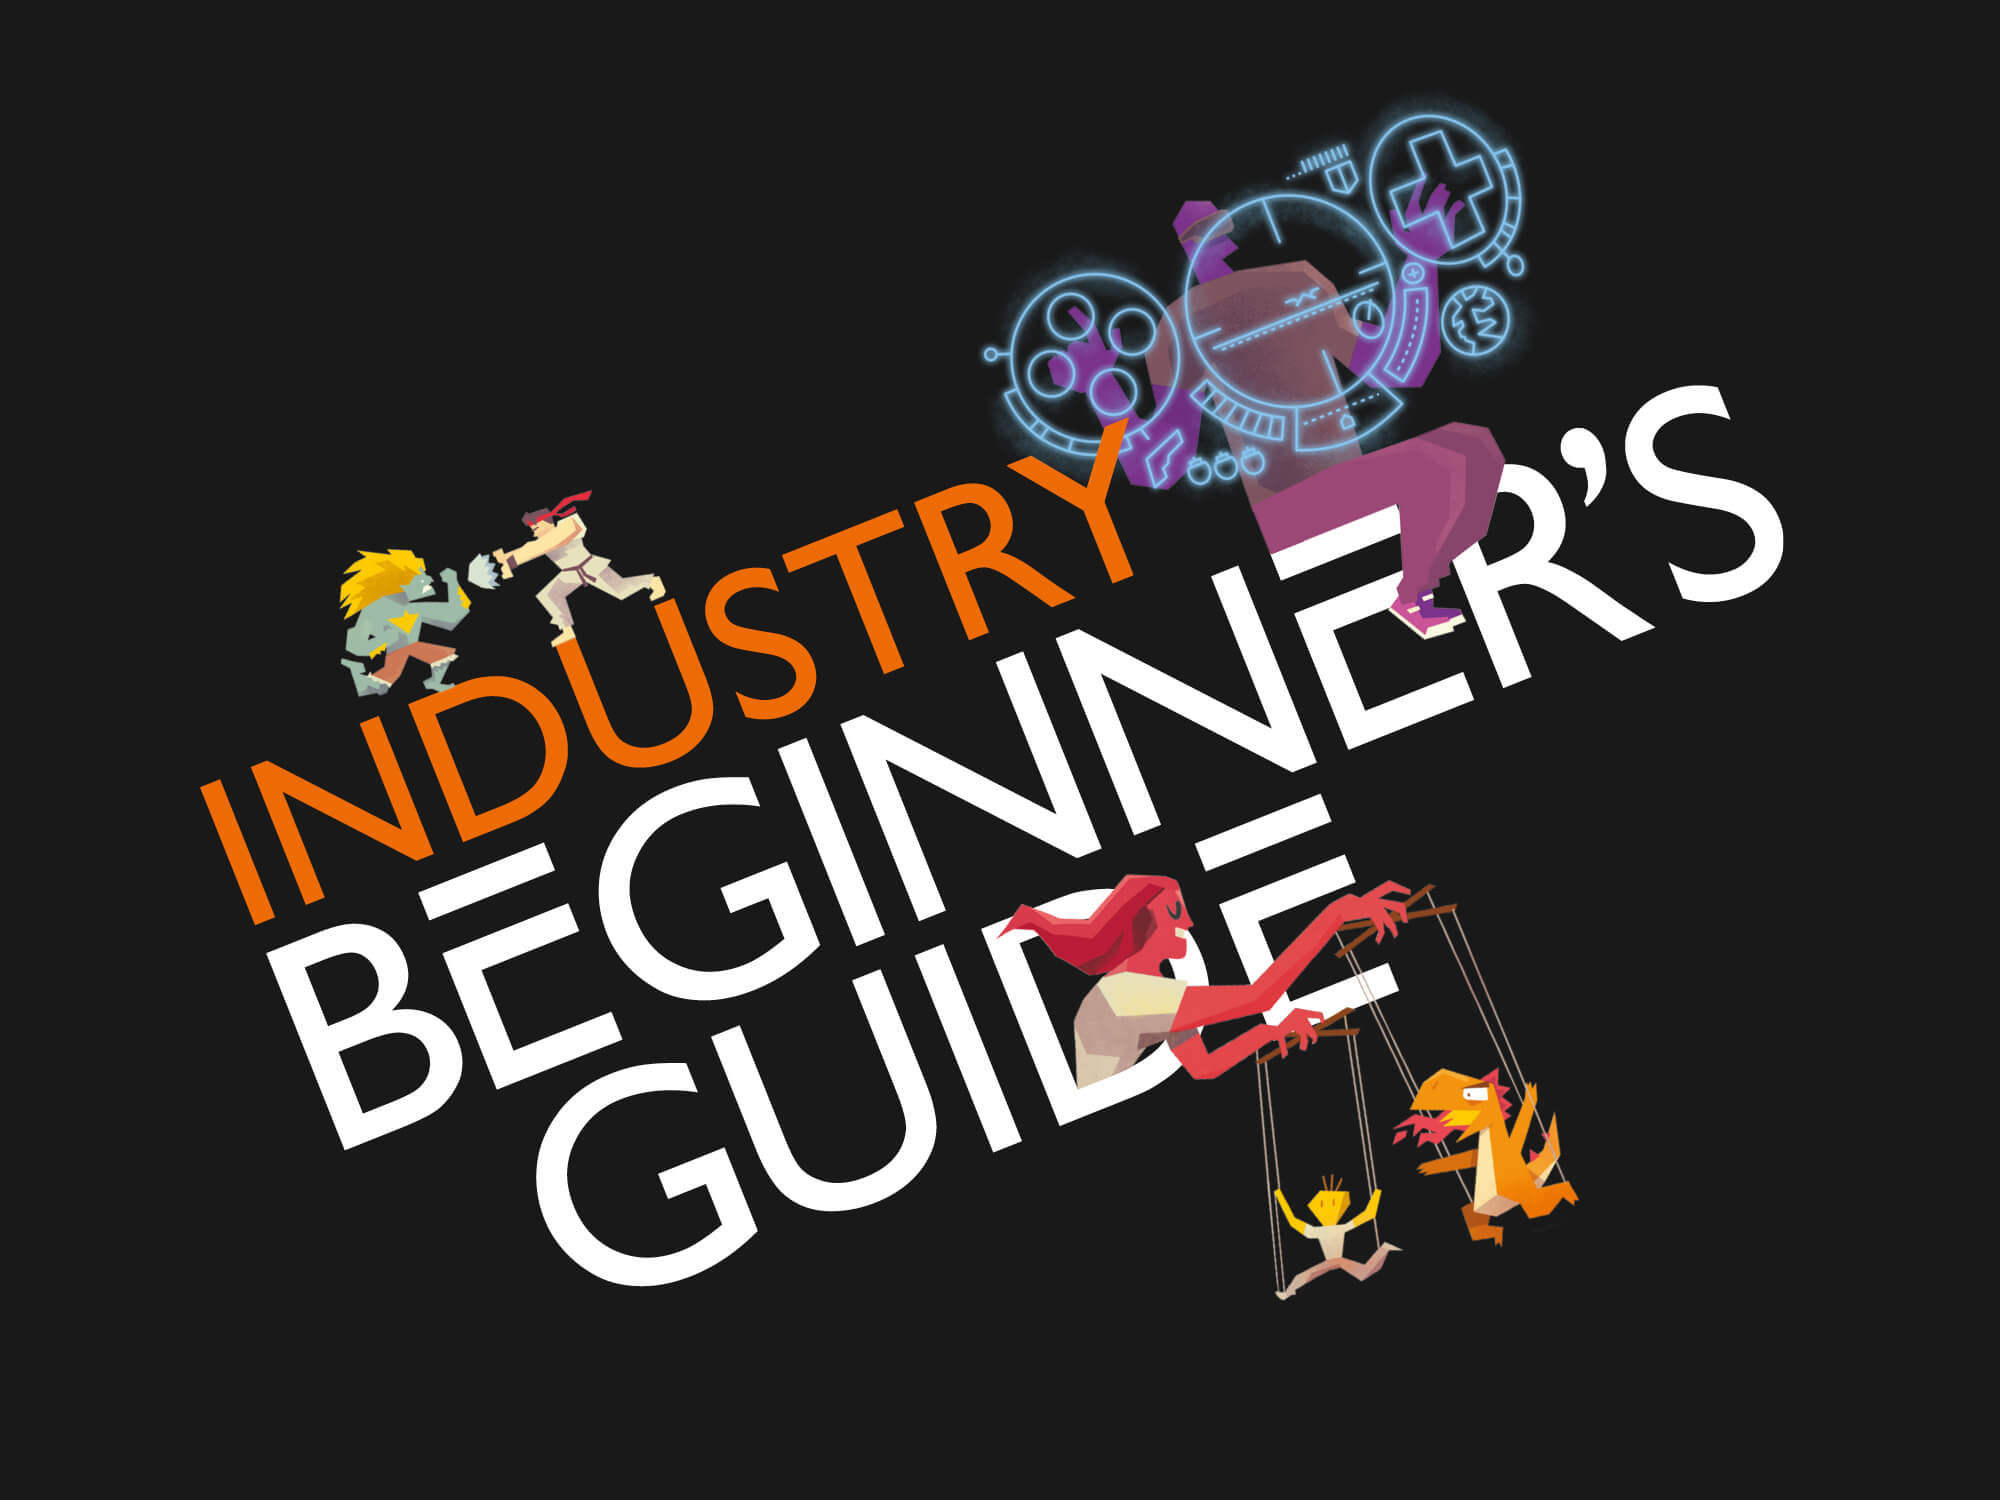 Industry Beginners guide title on black background